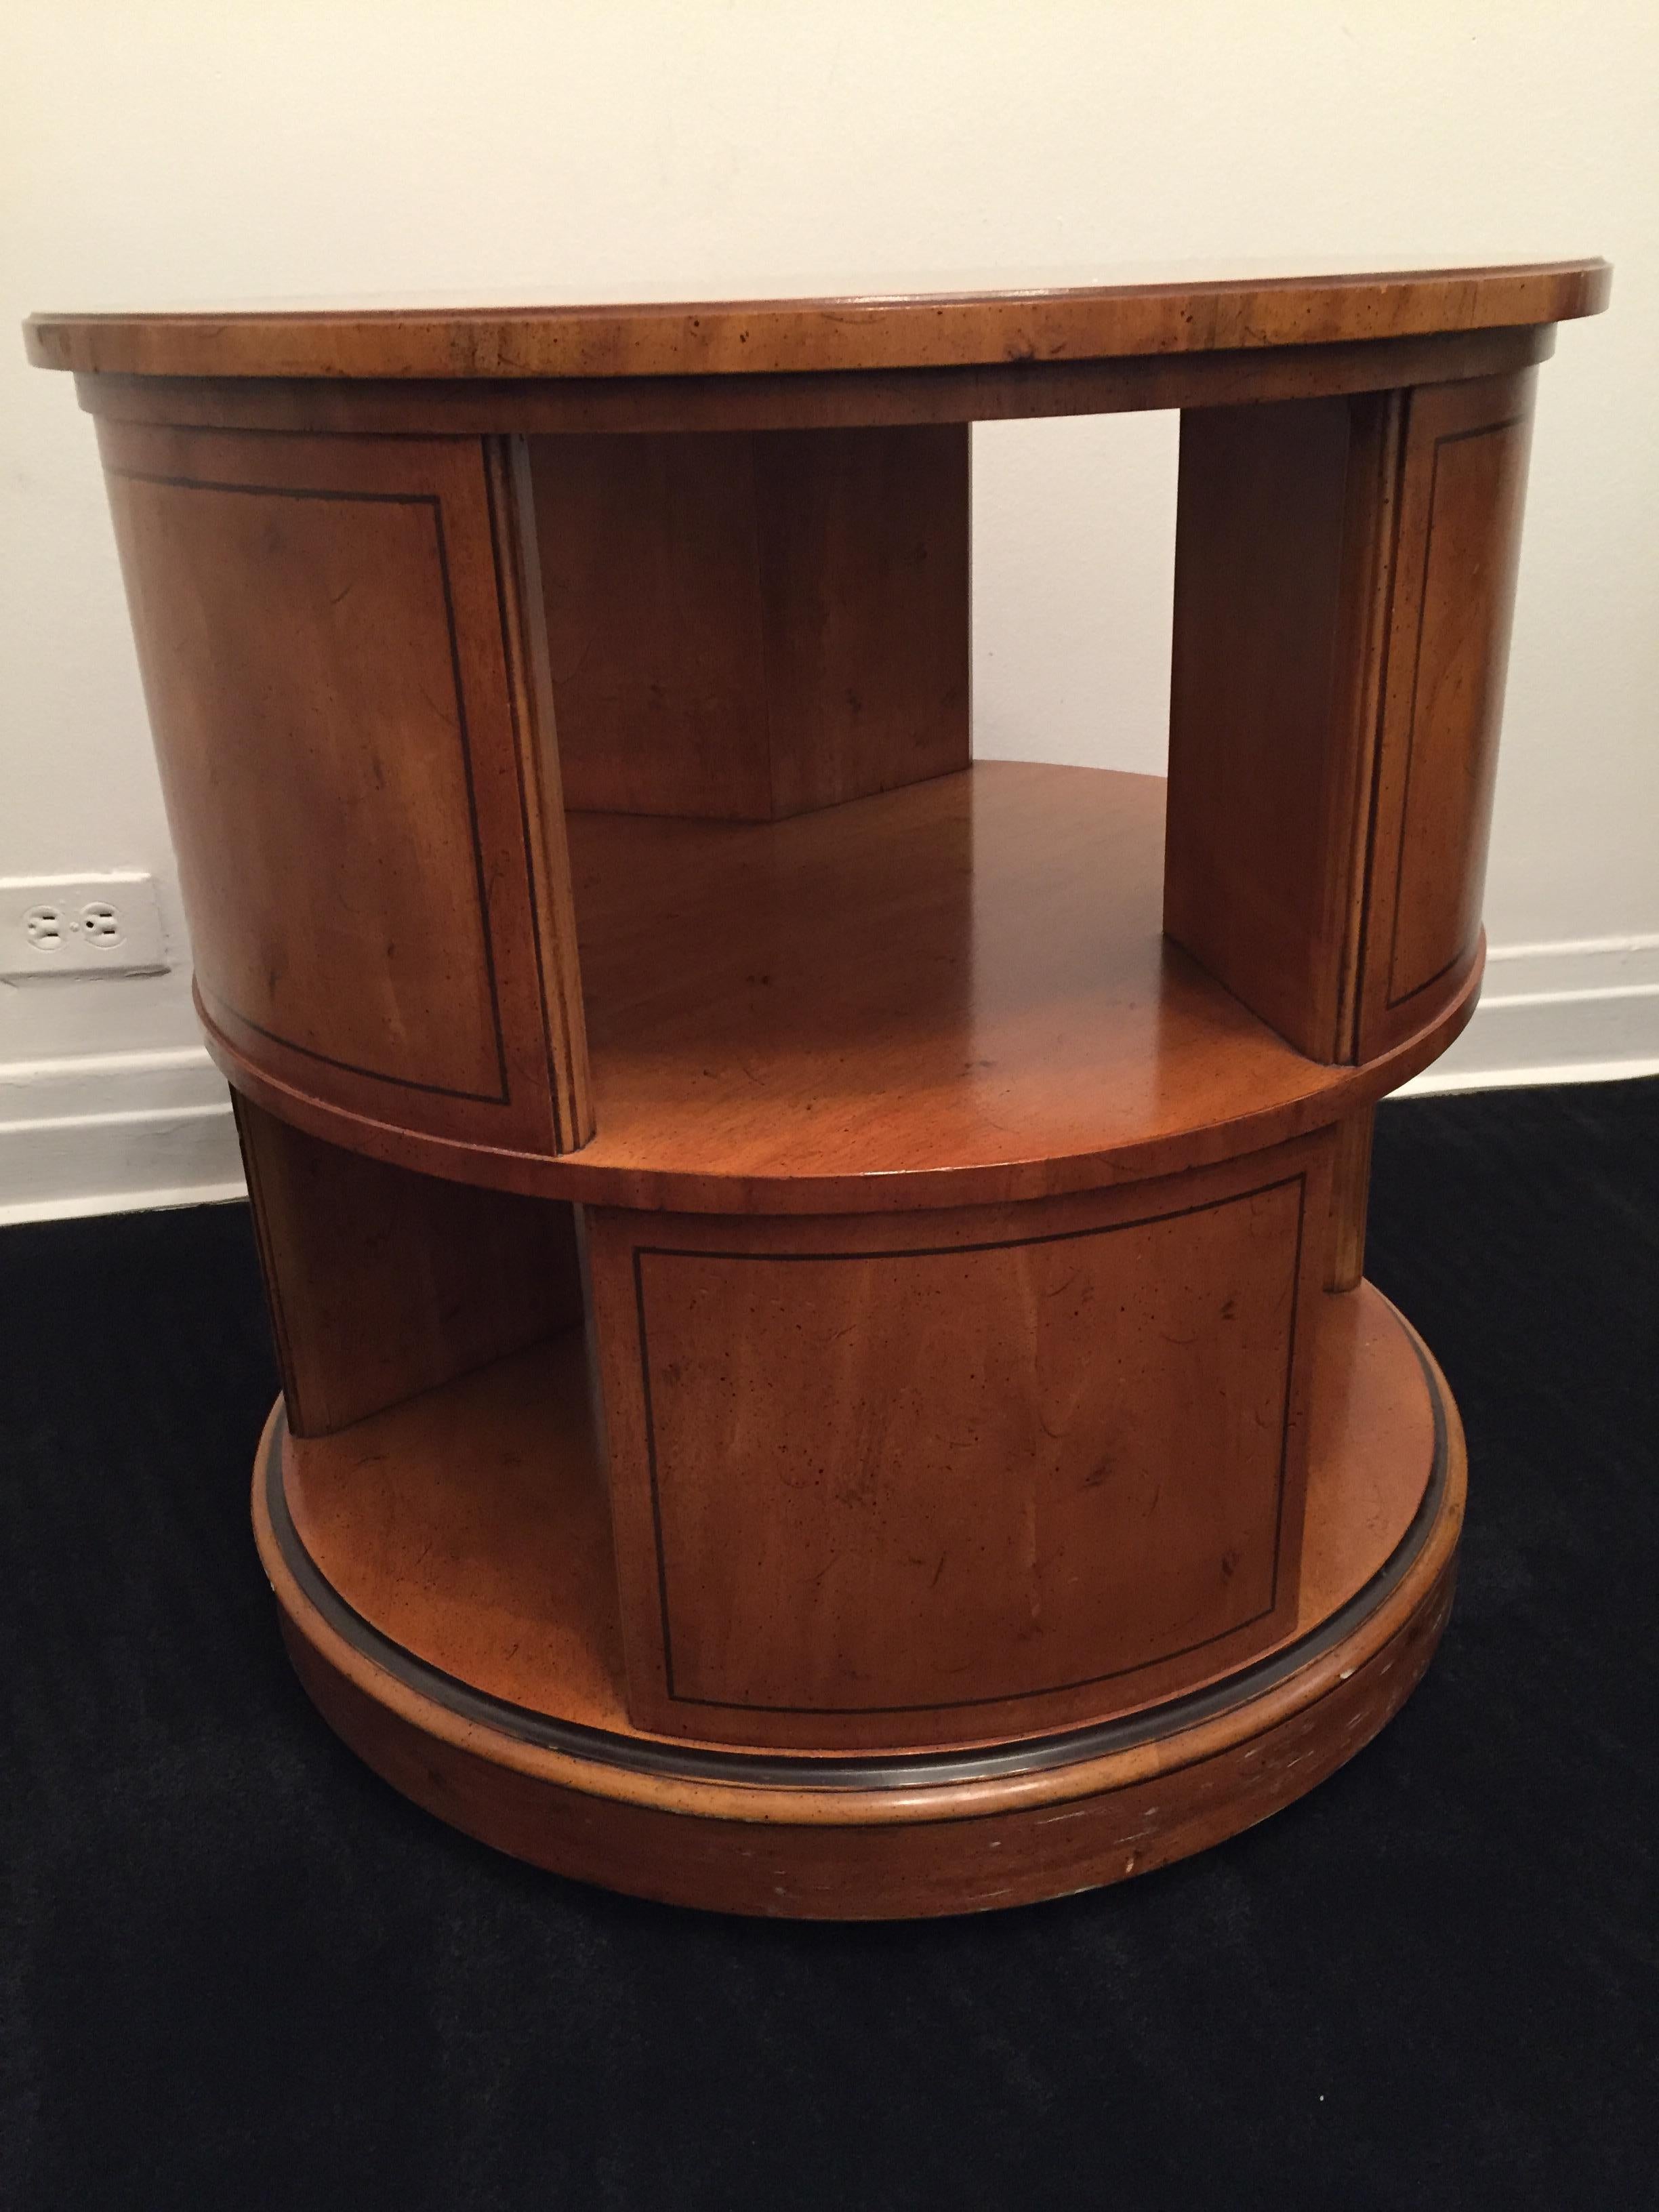 Mid-century Baker Palladian Inspired Revolving Book Case or Side Table
This burled wood, 1960s book case / side table was inherited from our grandmother.
She had incredible taste, and had this made custom to complement the Baker Palladian suite of